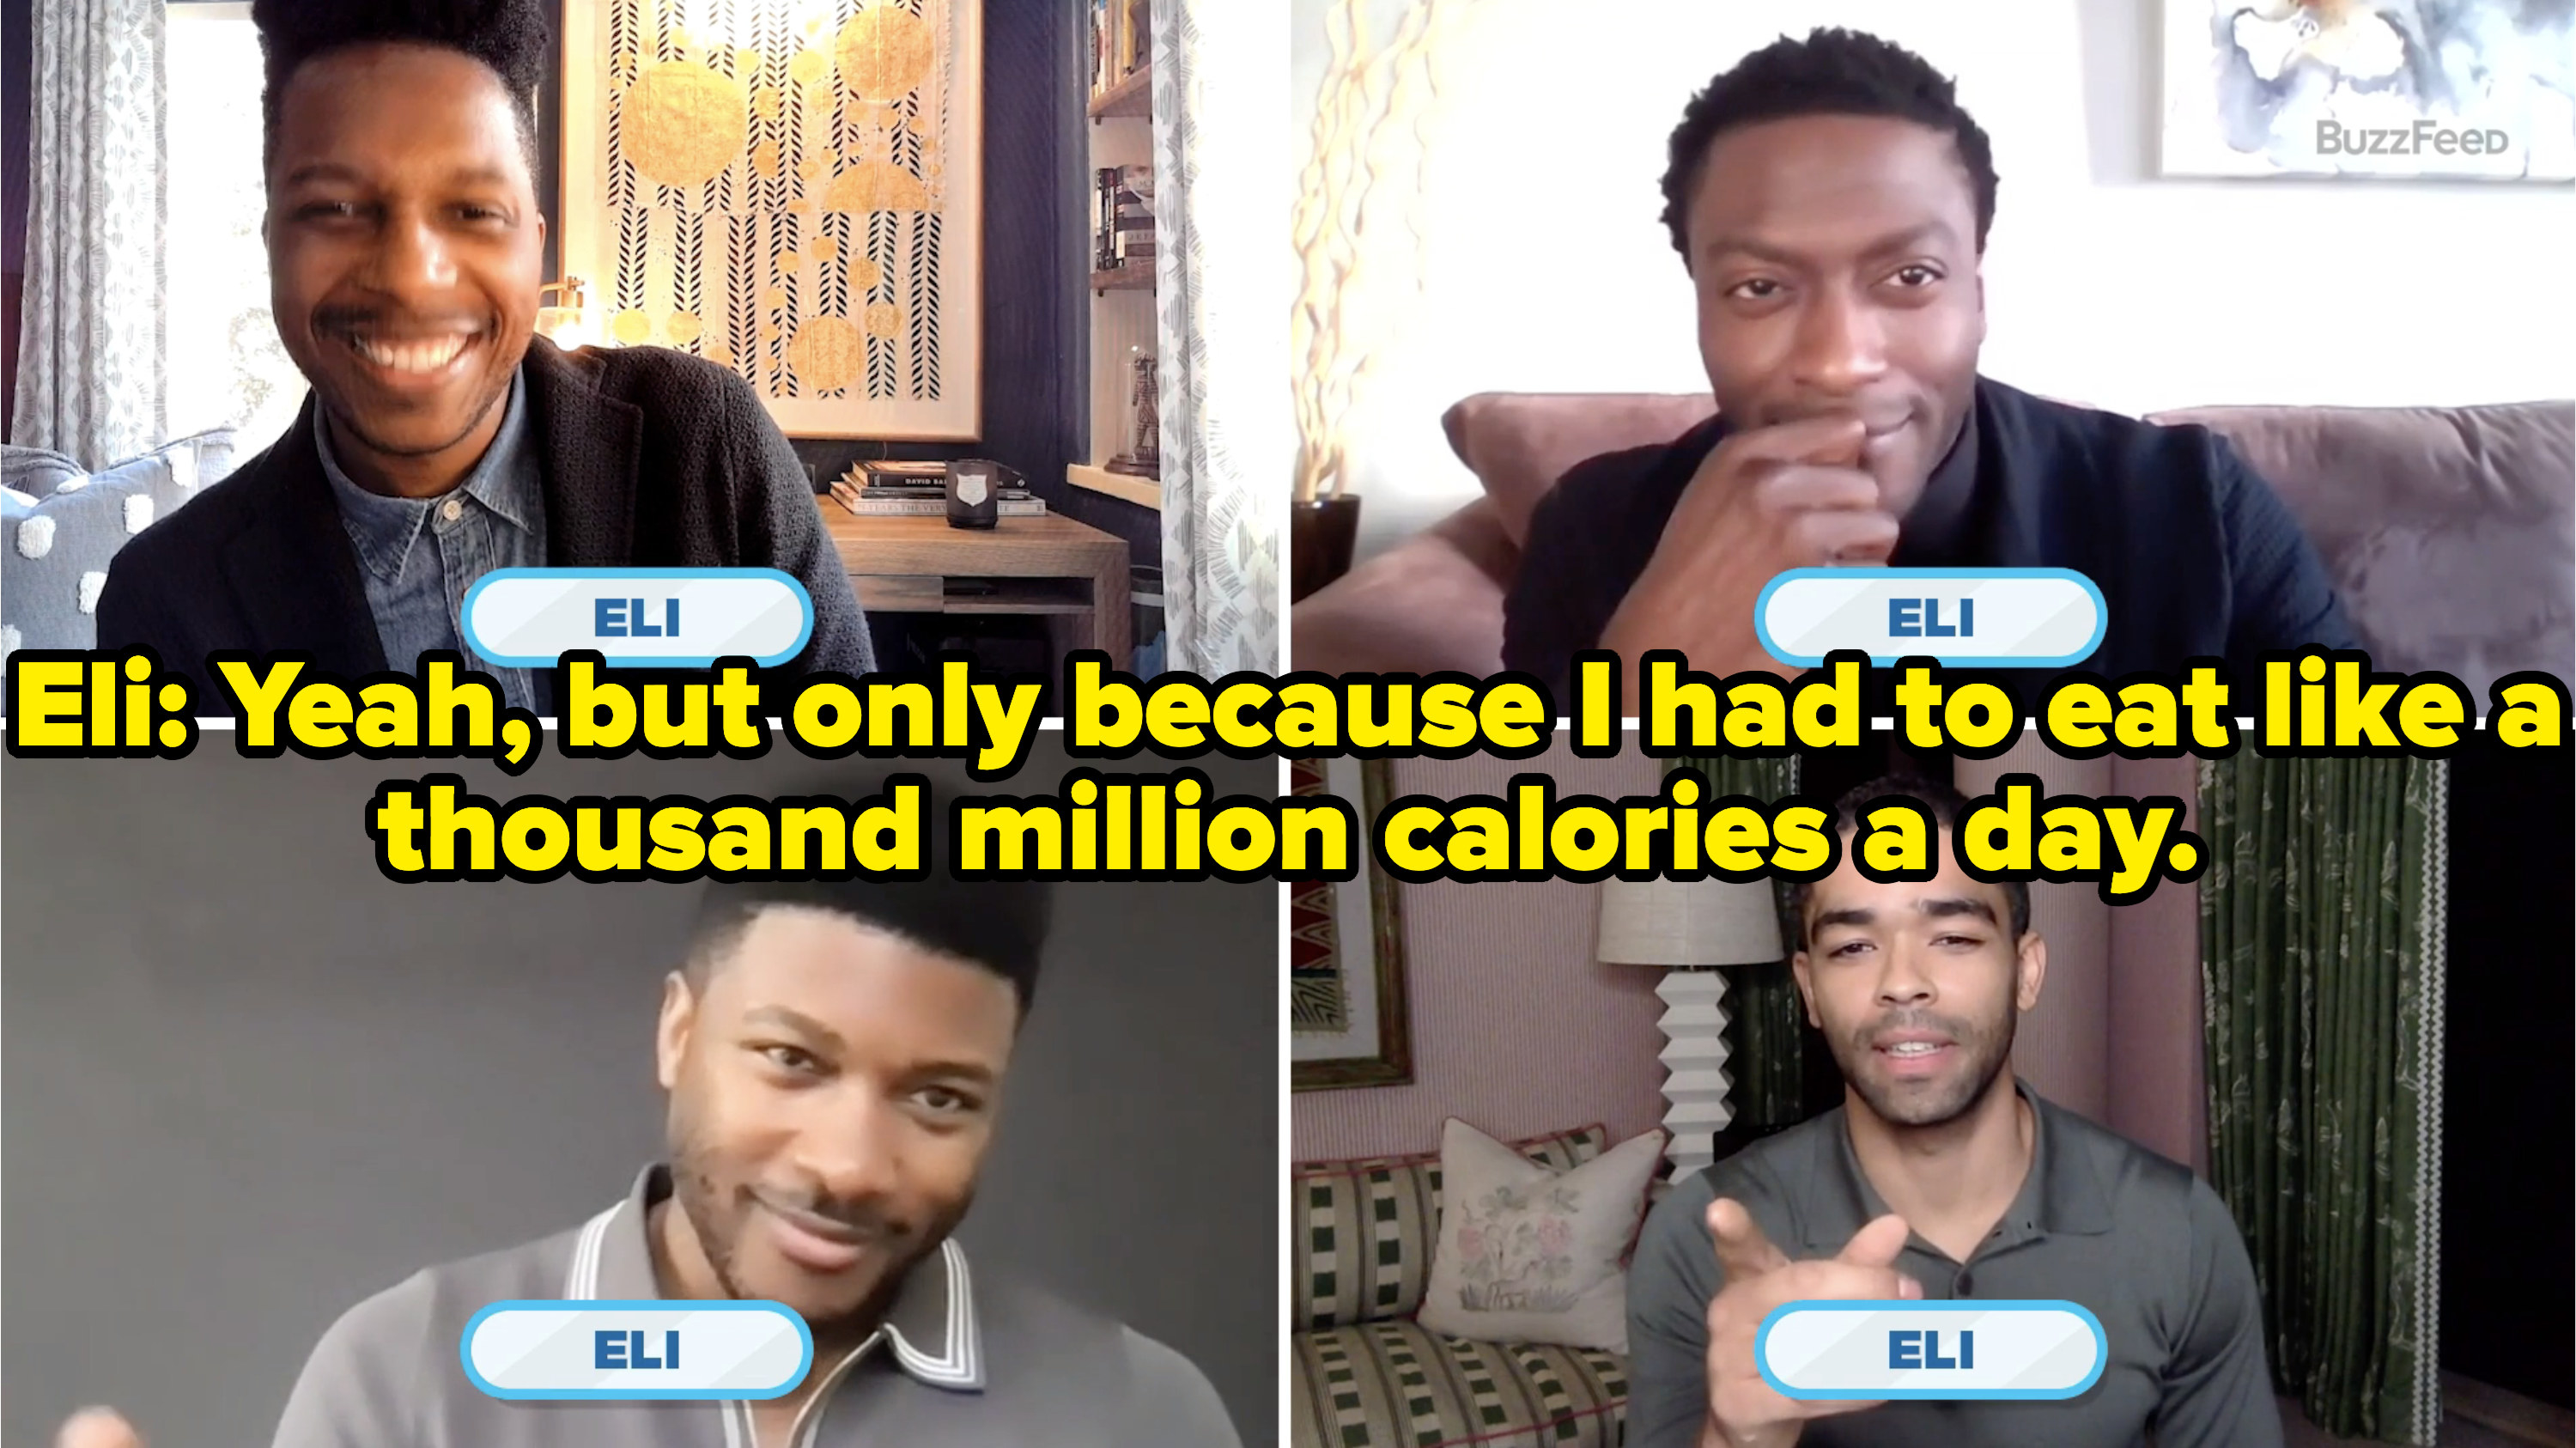 Eli defends himself saying he &quot;had to eat like a thousand million calories a day&quot;